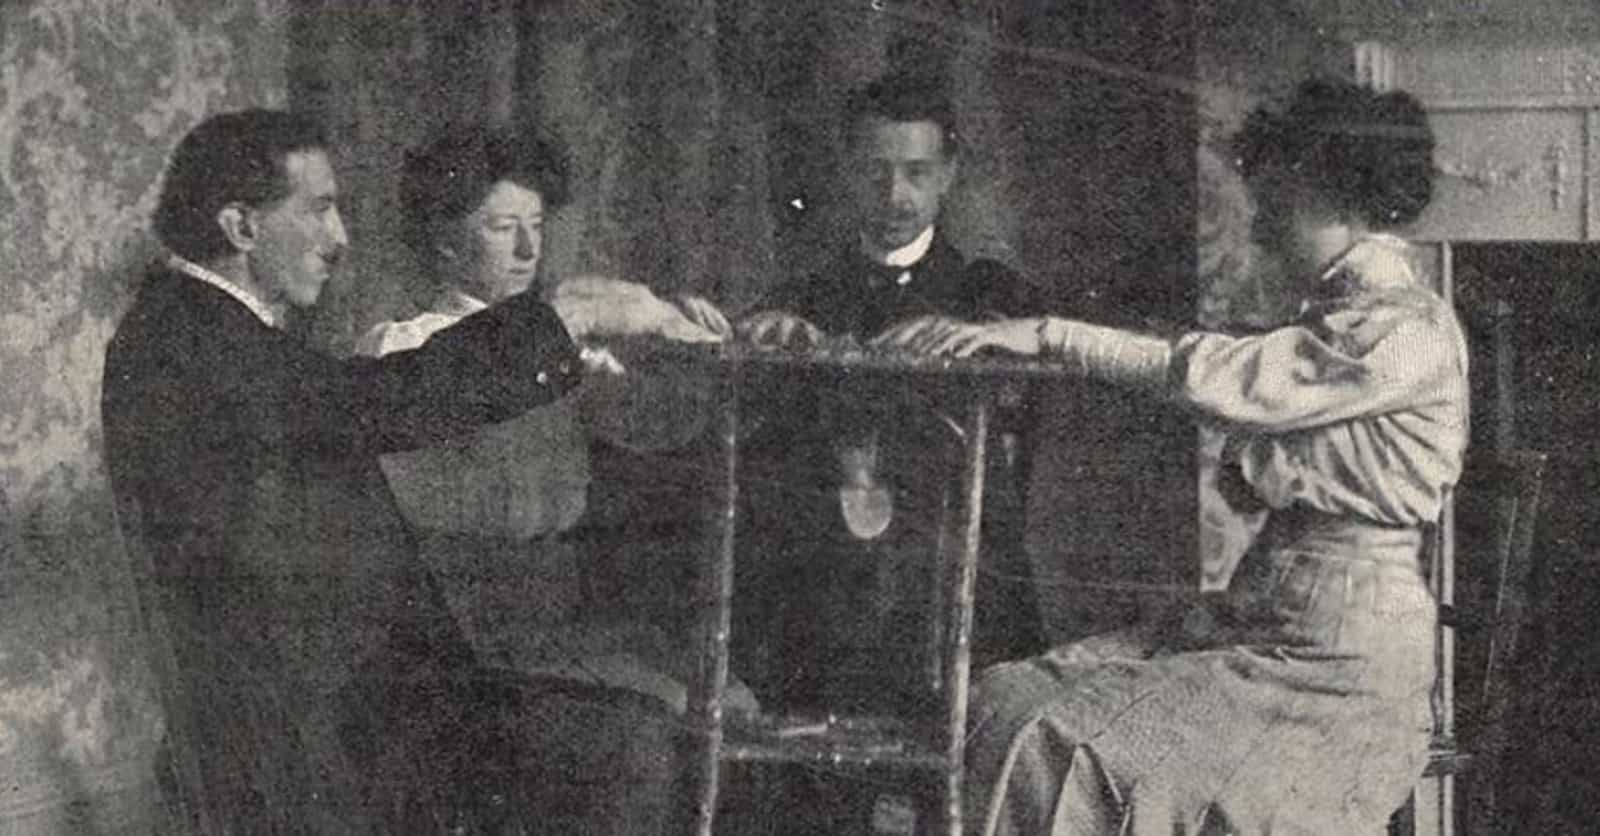 Tricks Of The Trade Mediums Used To Fake Paranormal Activity During A Seance